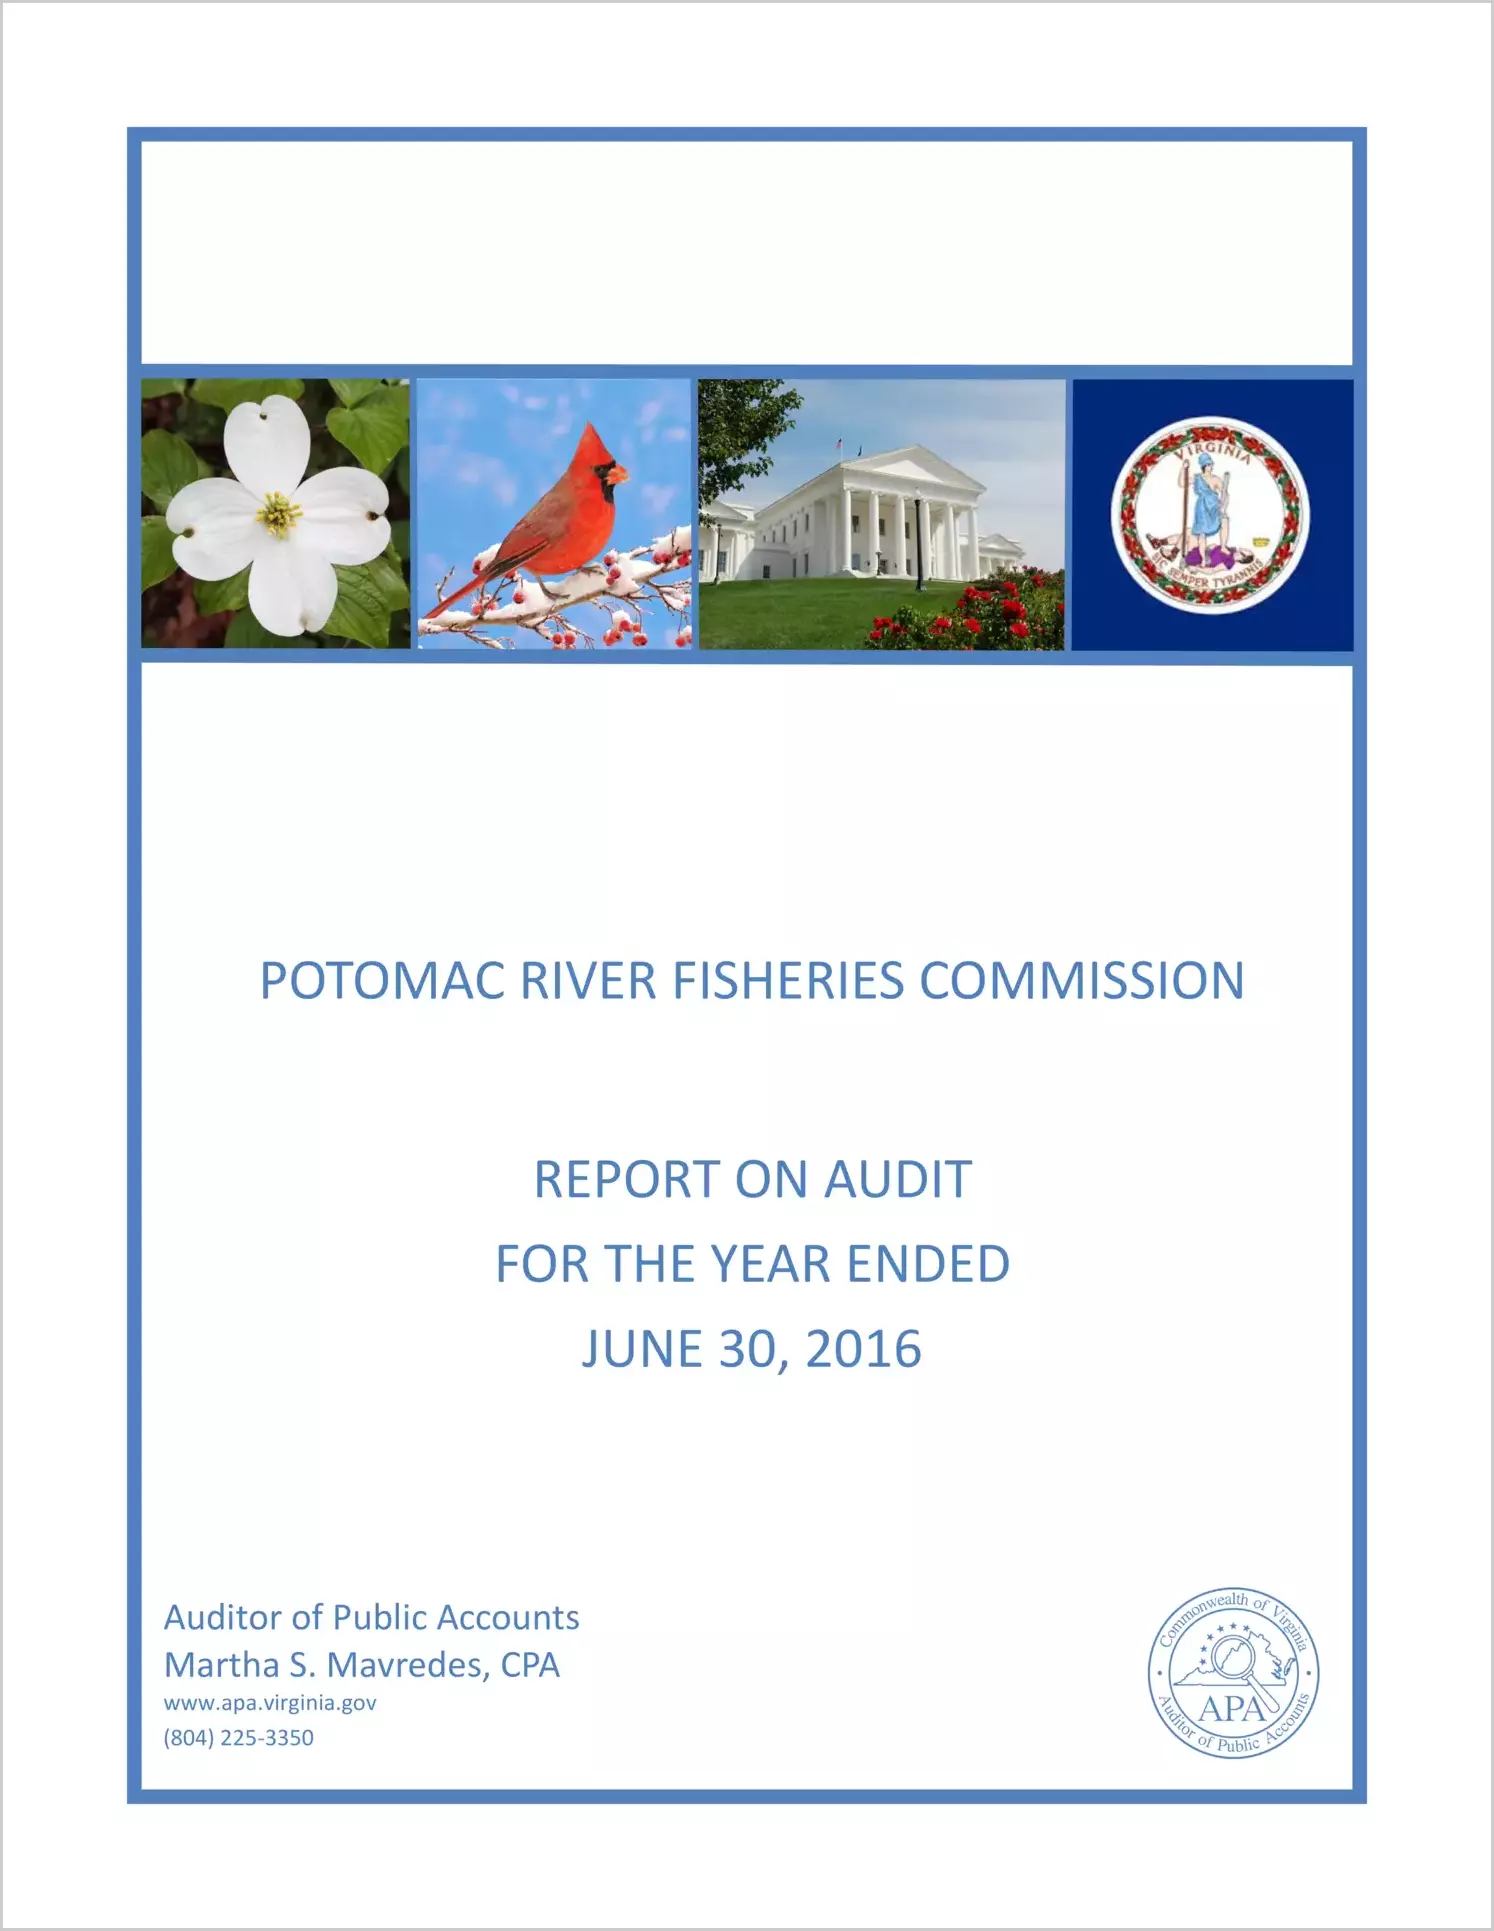 Potomac River Fisheries Commission for the year ended June 30, 2016